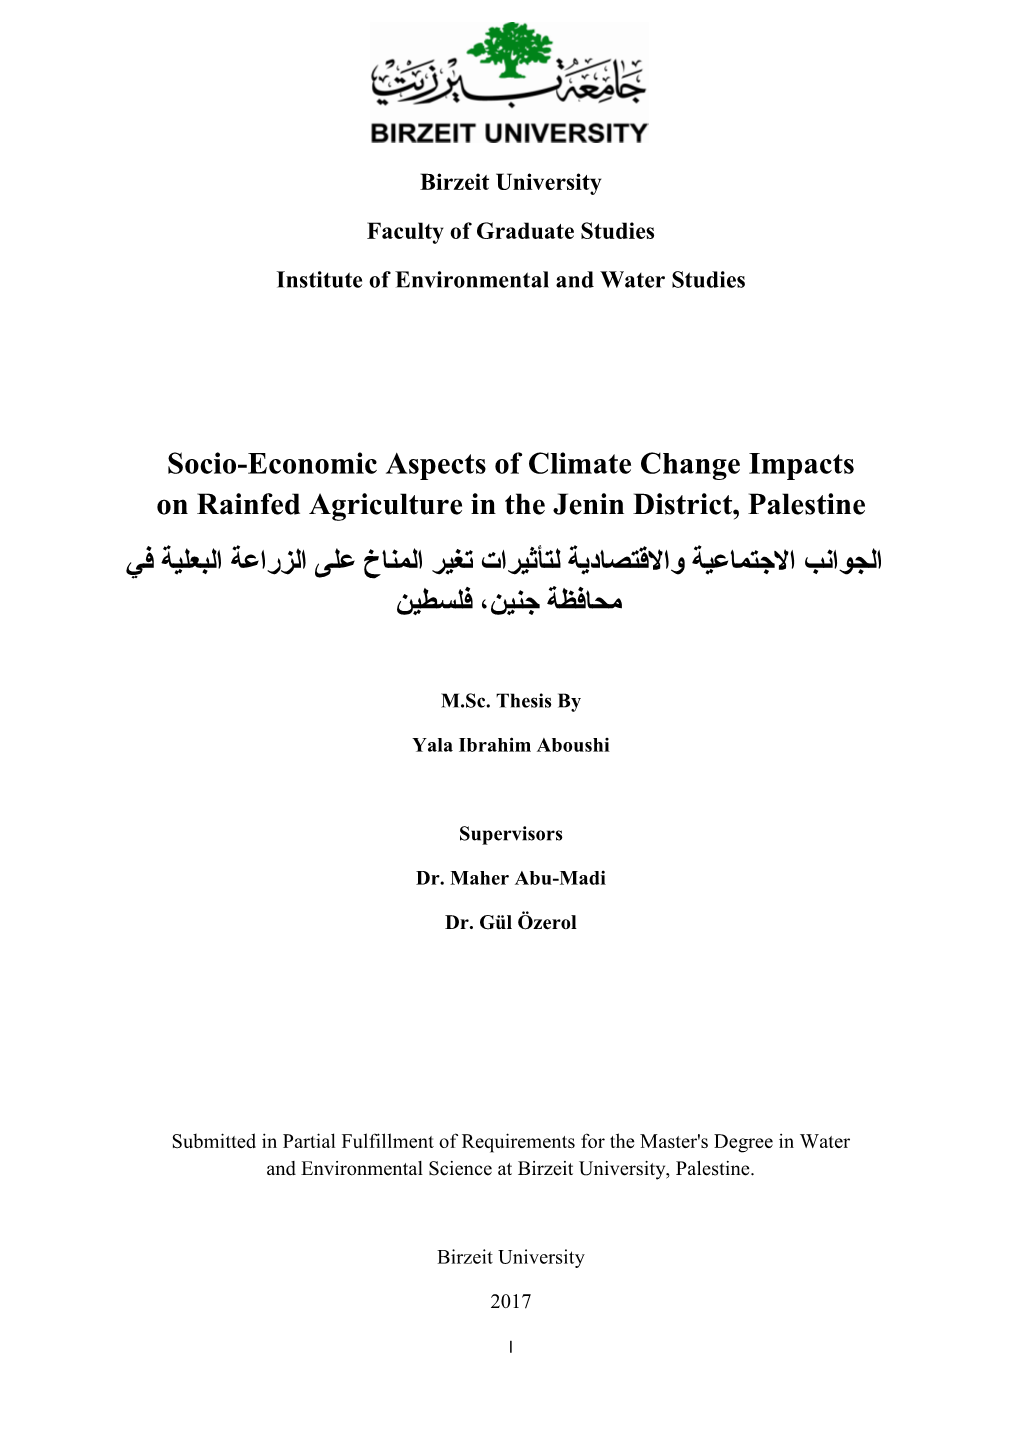 Socio-Economic Aspects of Climate Change Impacts on Rainfed Agriculture in the Jenin District, Palestine قمصعدي لمأث